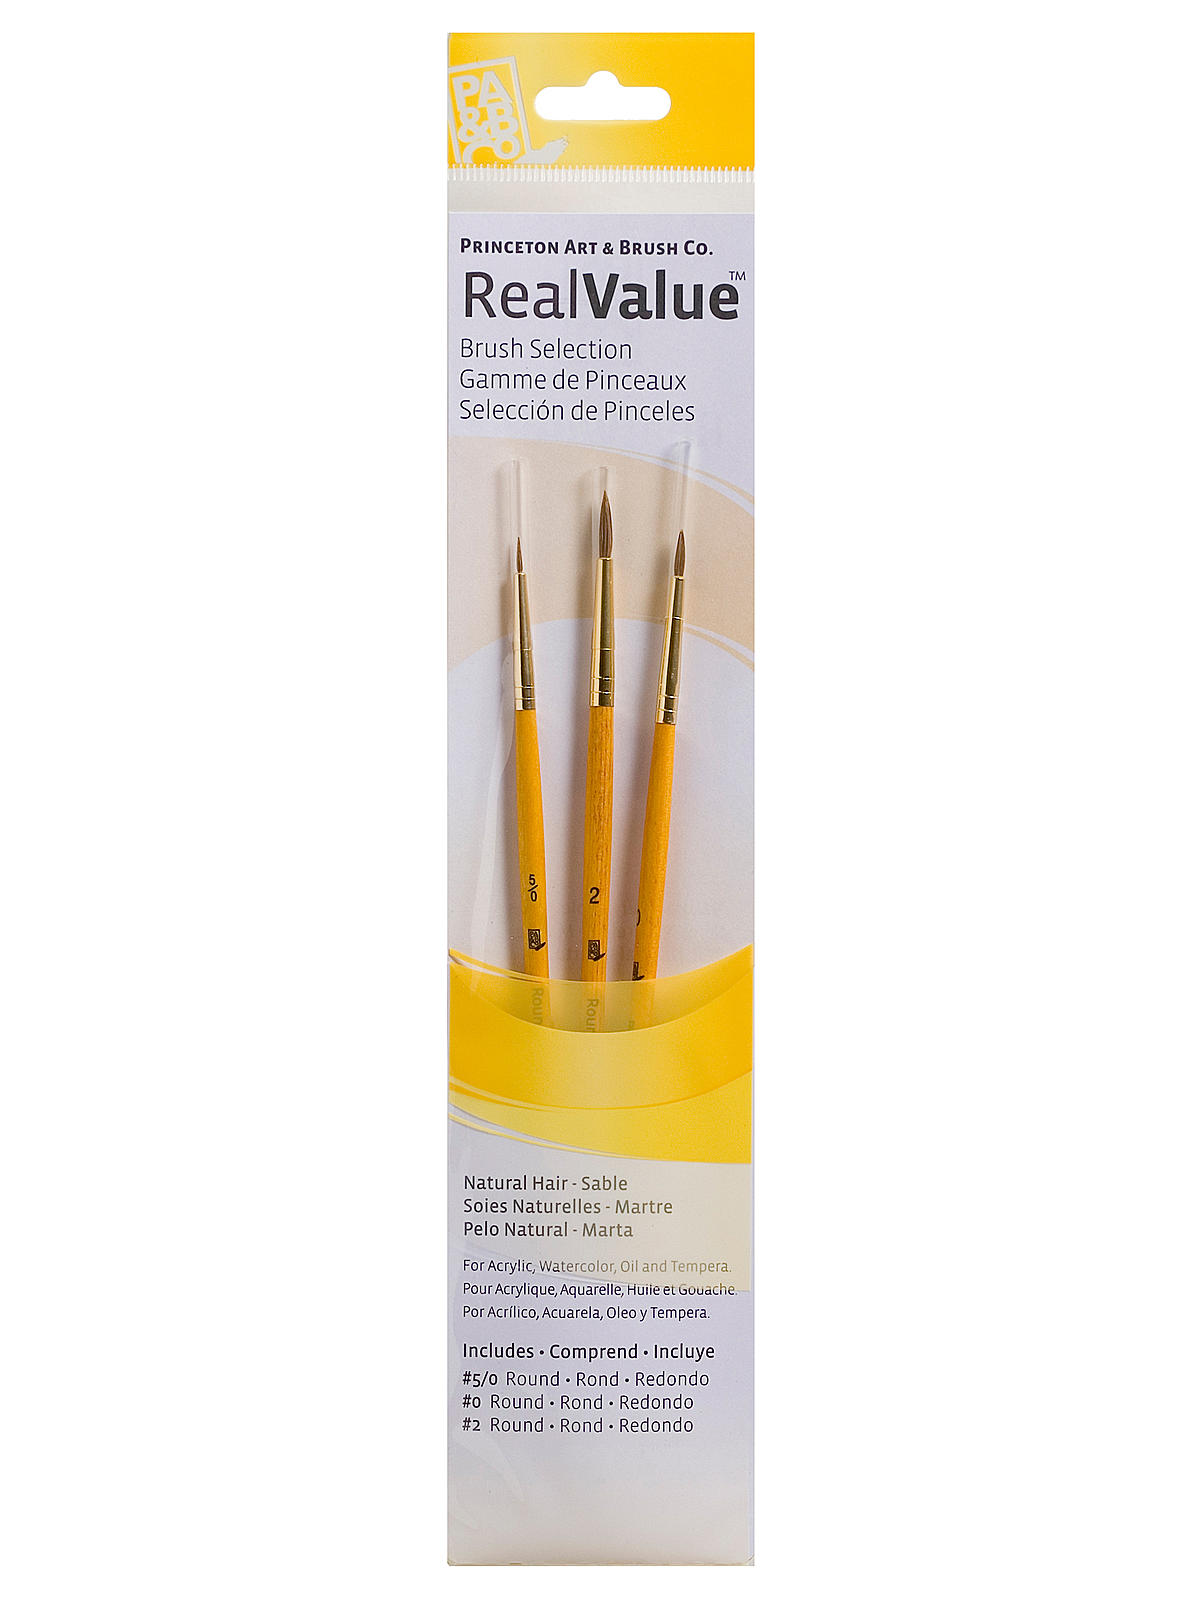 Real Value Series Yellow Handle Brush Sets 9105 set of 3